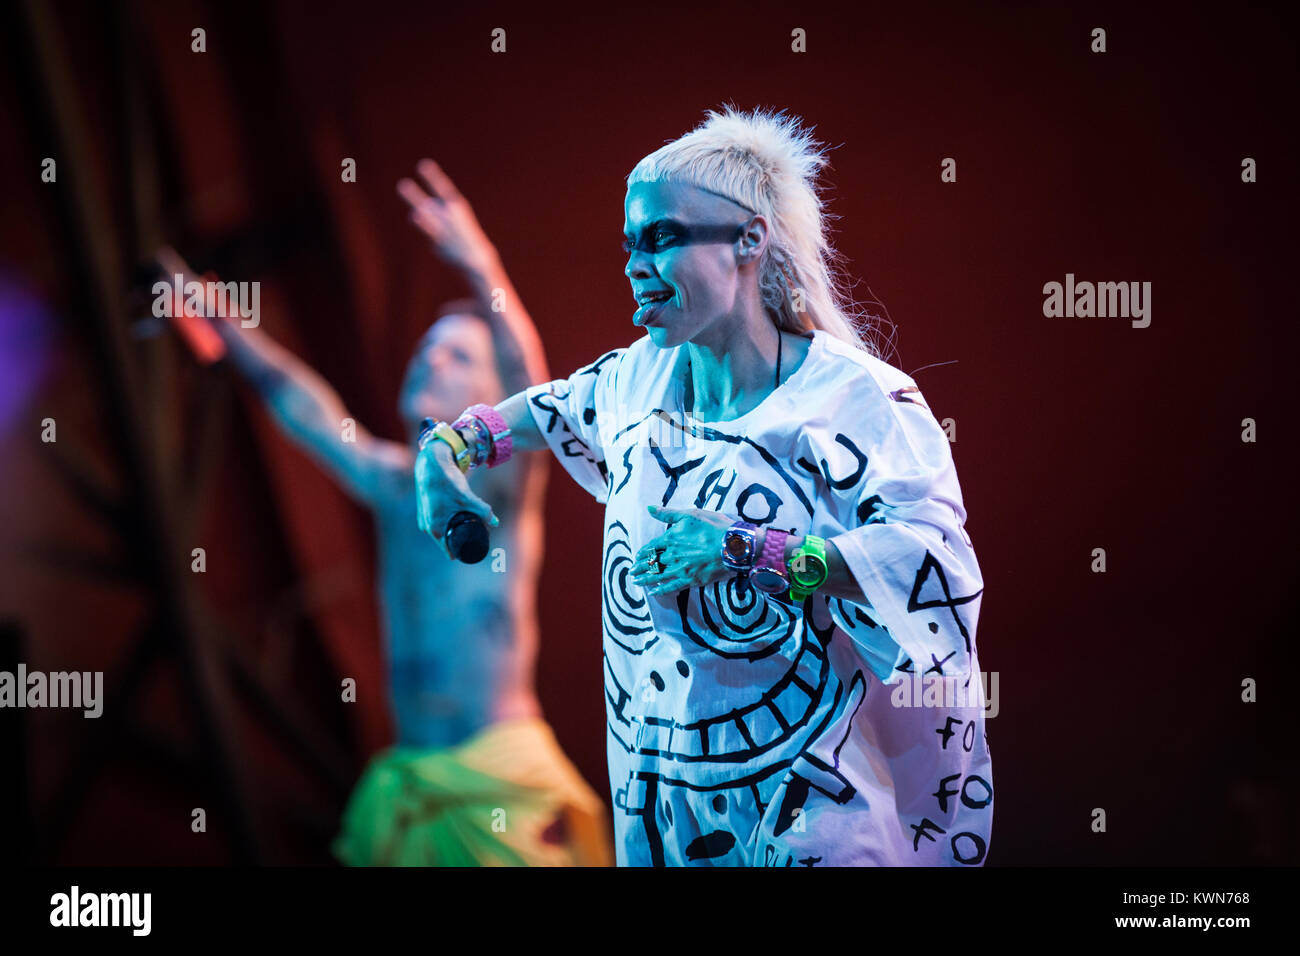 The South African rap duo Die Antwoord performs a live concert at Orange Stage at the Danish music festival Roskilde Festival 2015. The duo consists of the two rave-vocalist Ninja and YoLandi Visser (pictured) who perform lyrics in Afrikaans, Xhosa and English. Denmark, 03/07 2015. Stock Photo